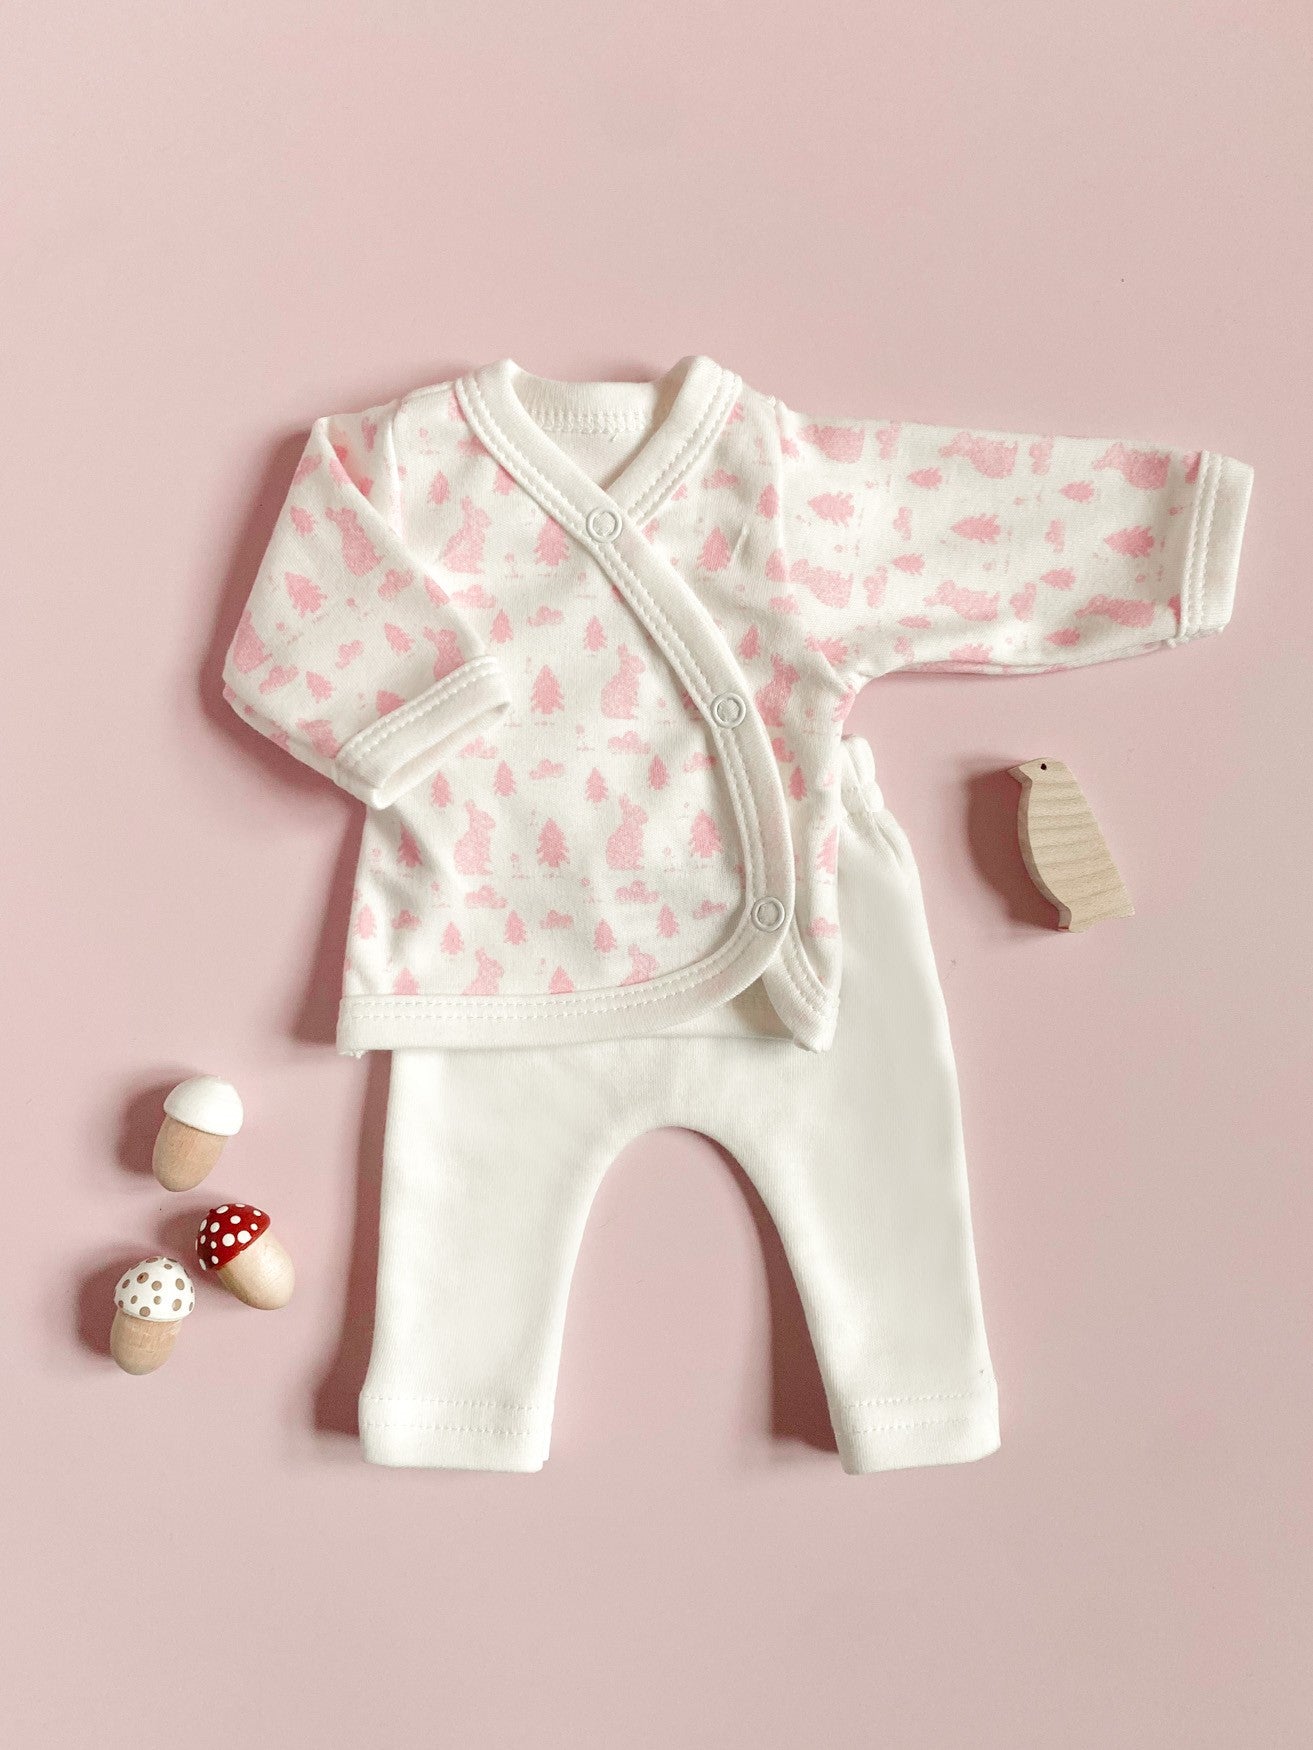 Wrap Top & Trouser Set. Bunny Meadow, Organic Cotton Top & Trousers Tiny & Small 